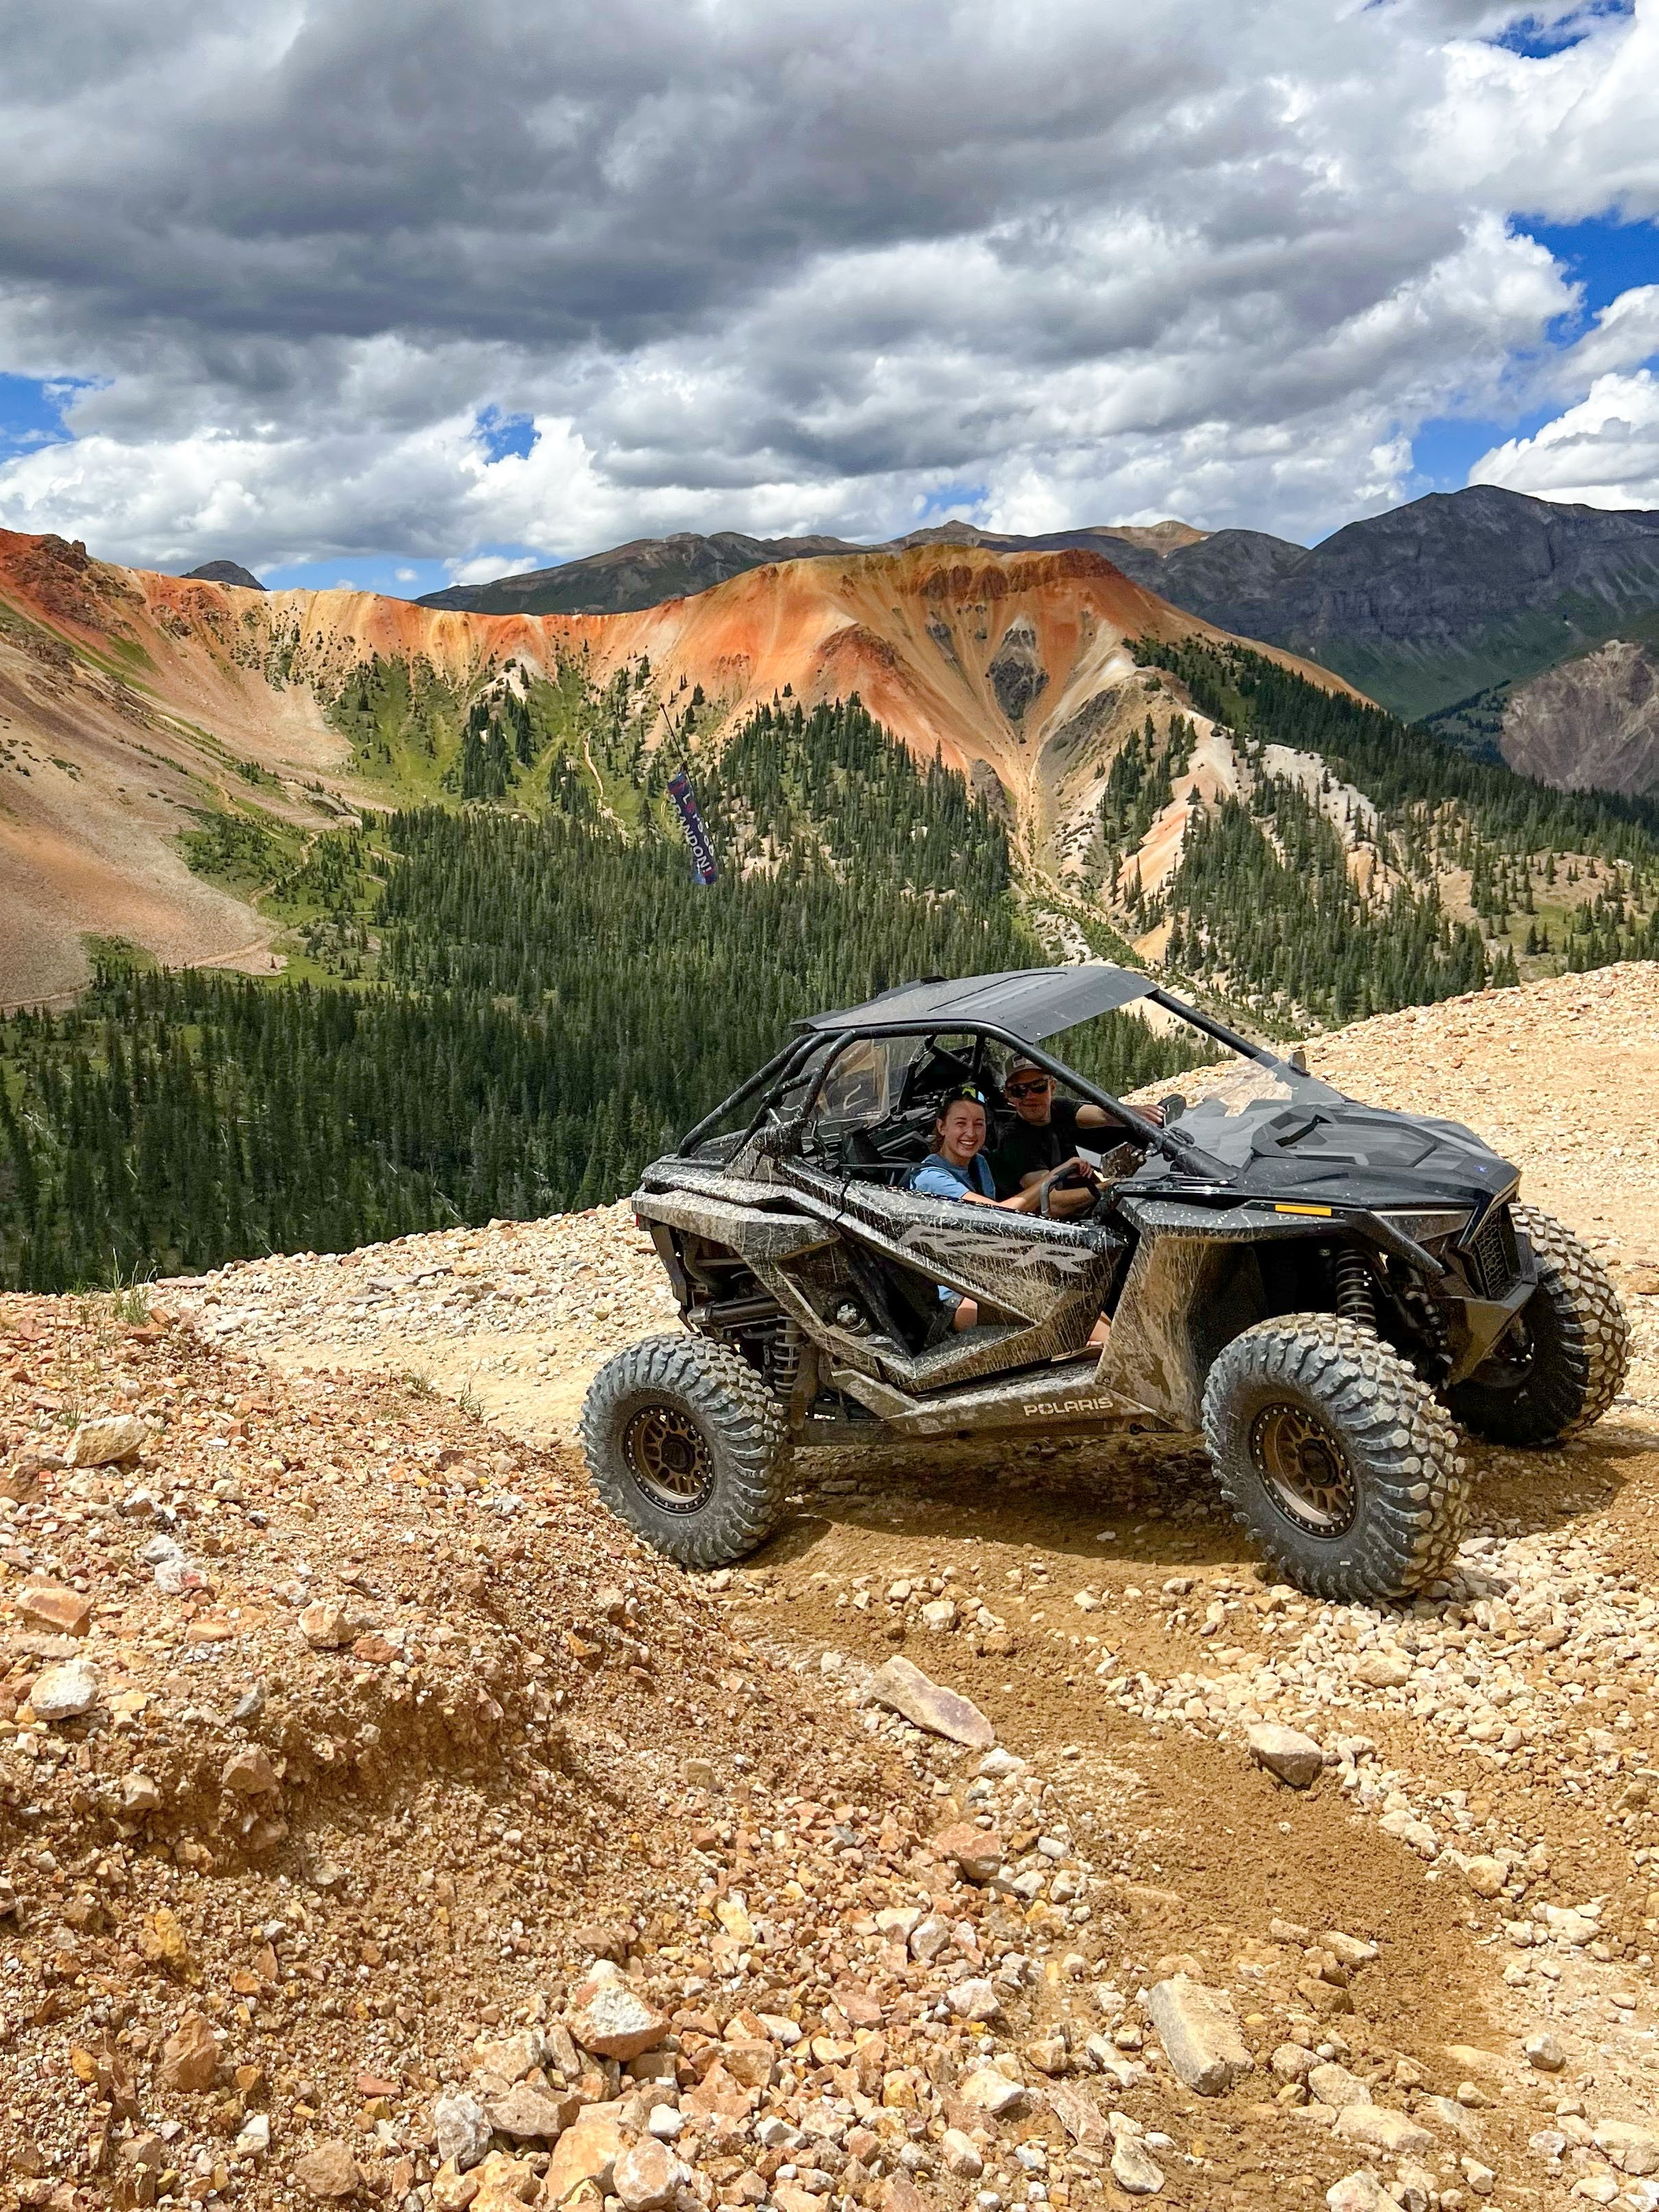 Red Mountain and an OHV